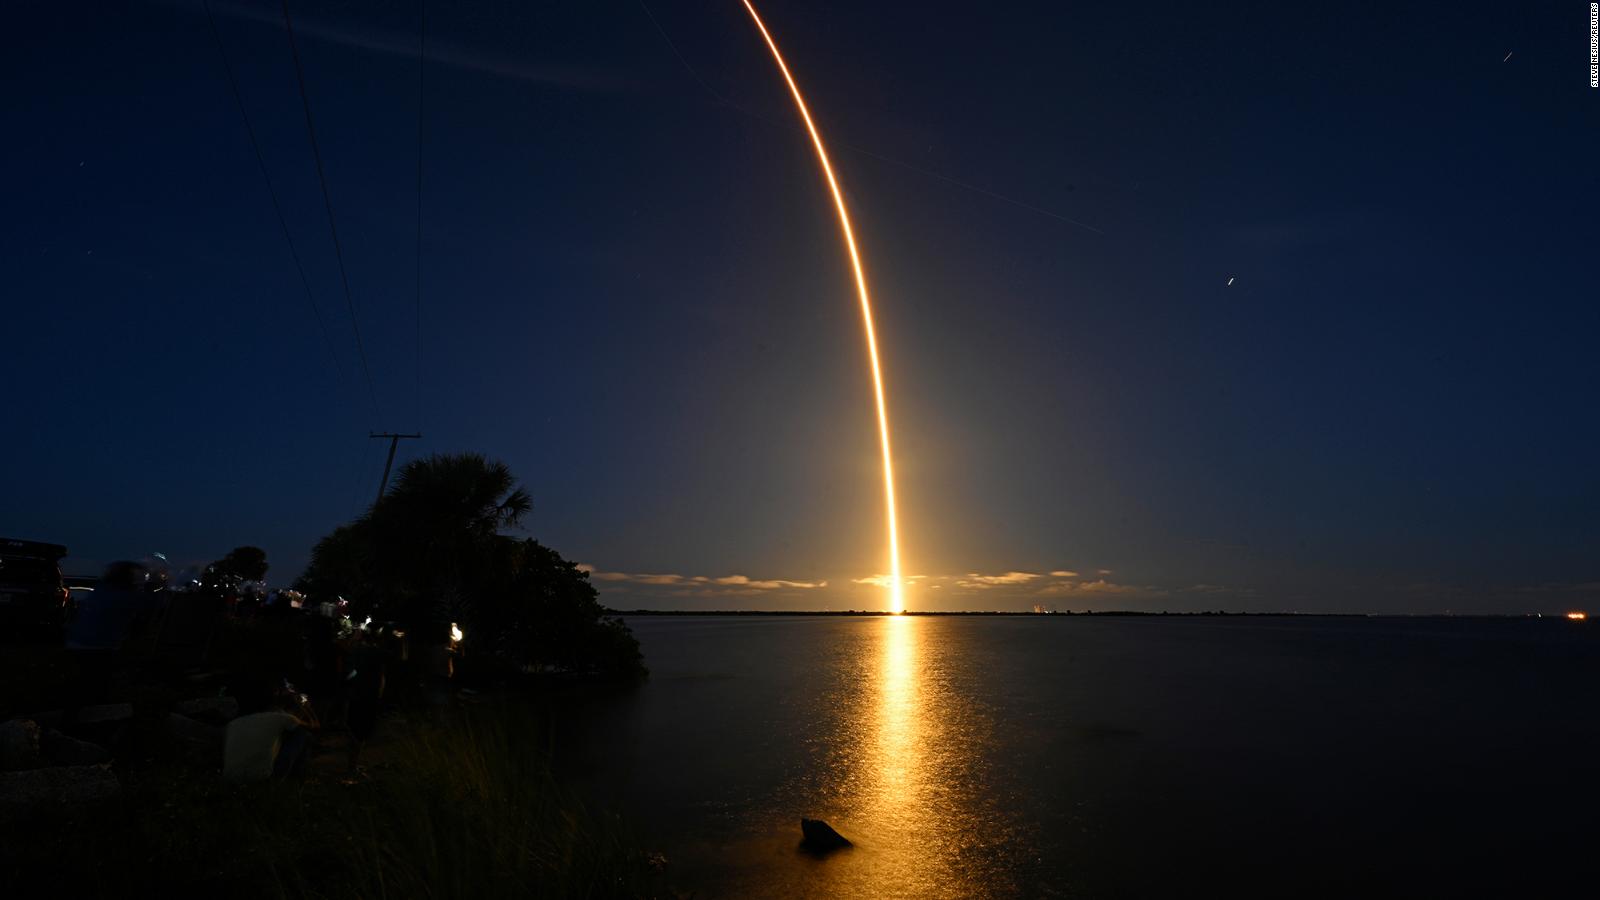 Spacex Inspiration4 Wallpapers